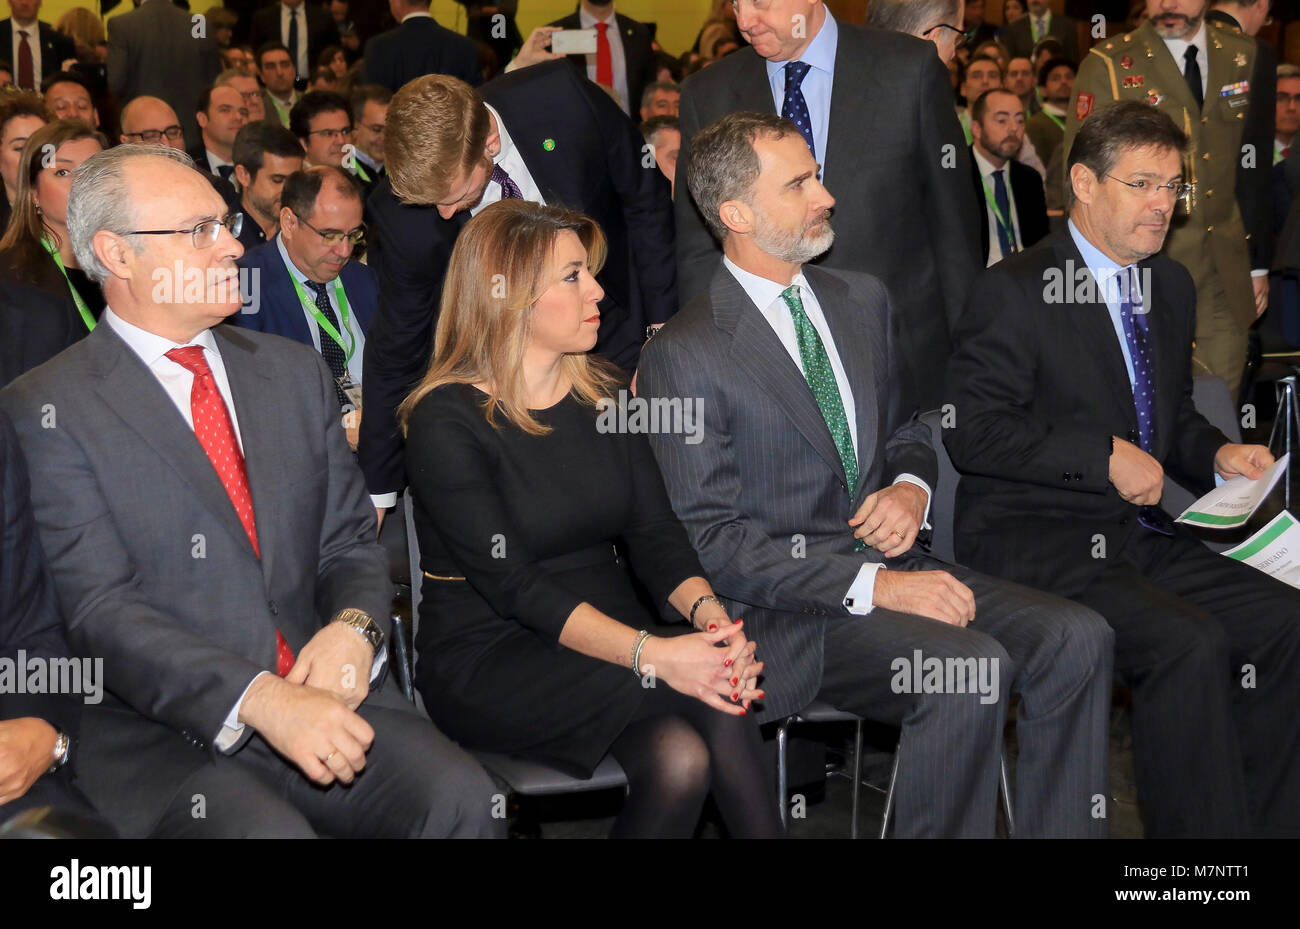 Felipe VI, and politicians Susana Diaz and Rafael Catala during the inauguration of the 1 edition of “ Andalucia Digital Week “ in Sevilla on Monday 12, March 2018 Credit: Gtres Información más Comuniación on line, S.L./Alamy Live News Stock Photo